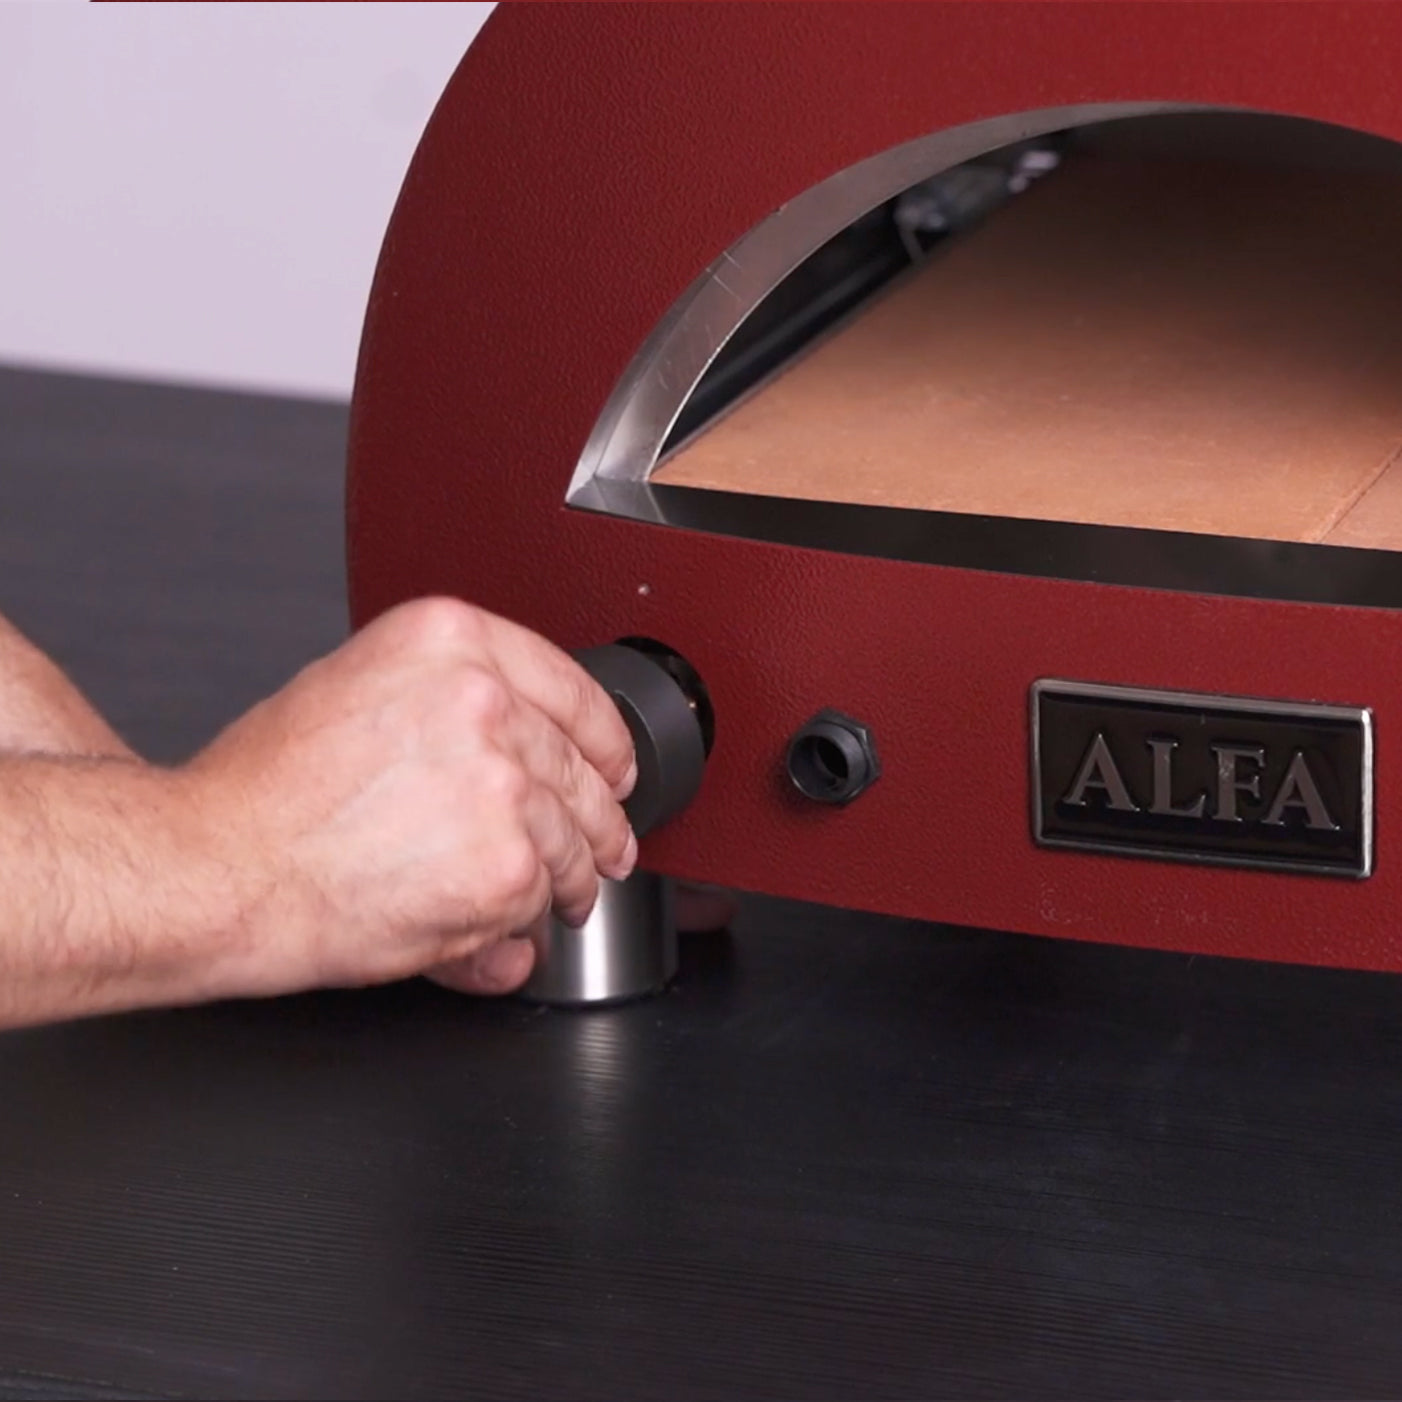 How to assemble your Portable oven